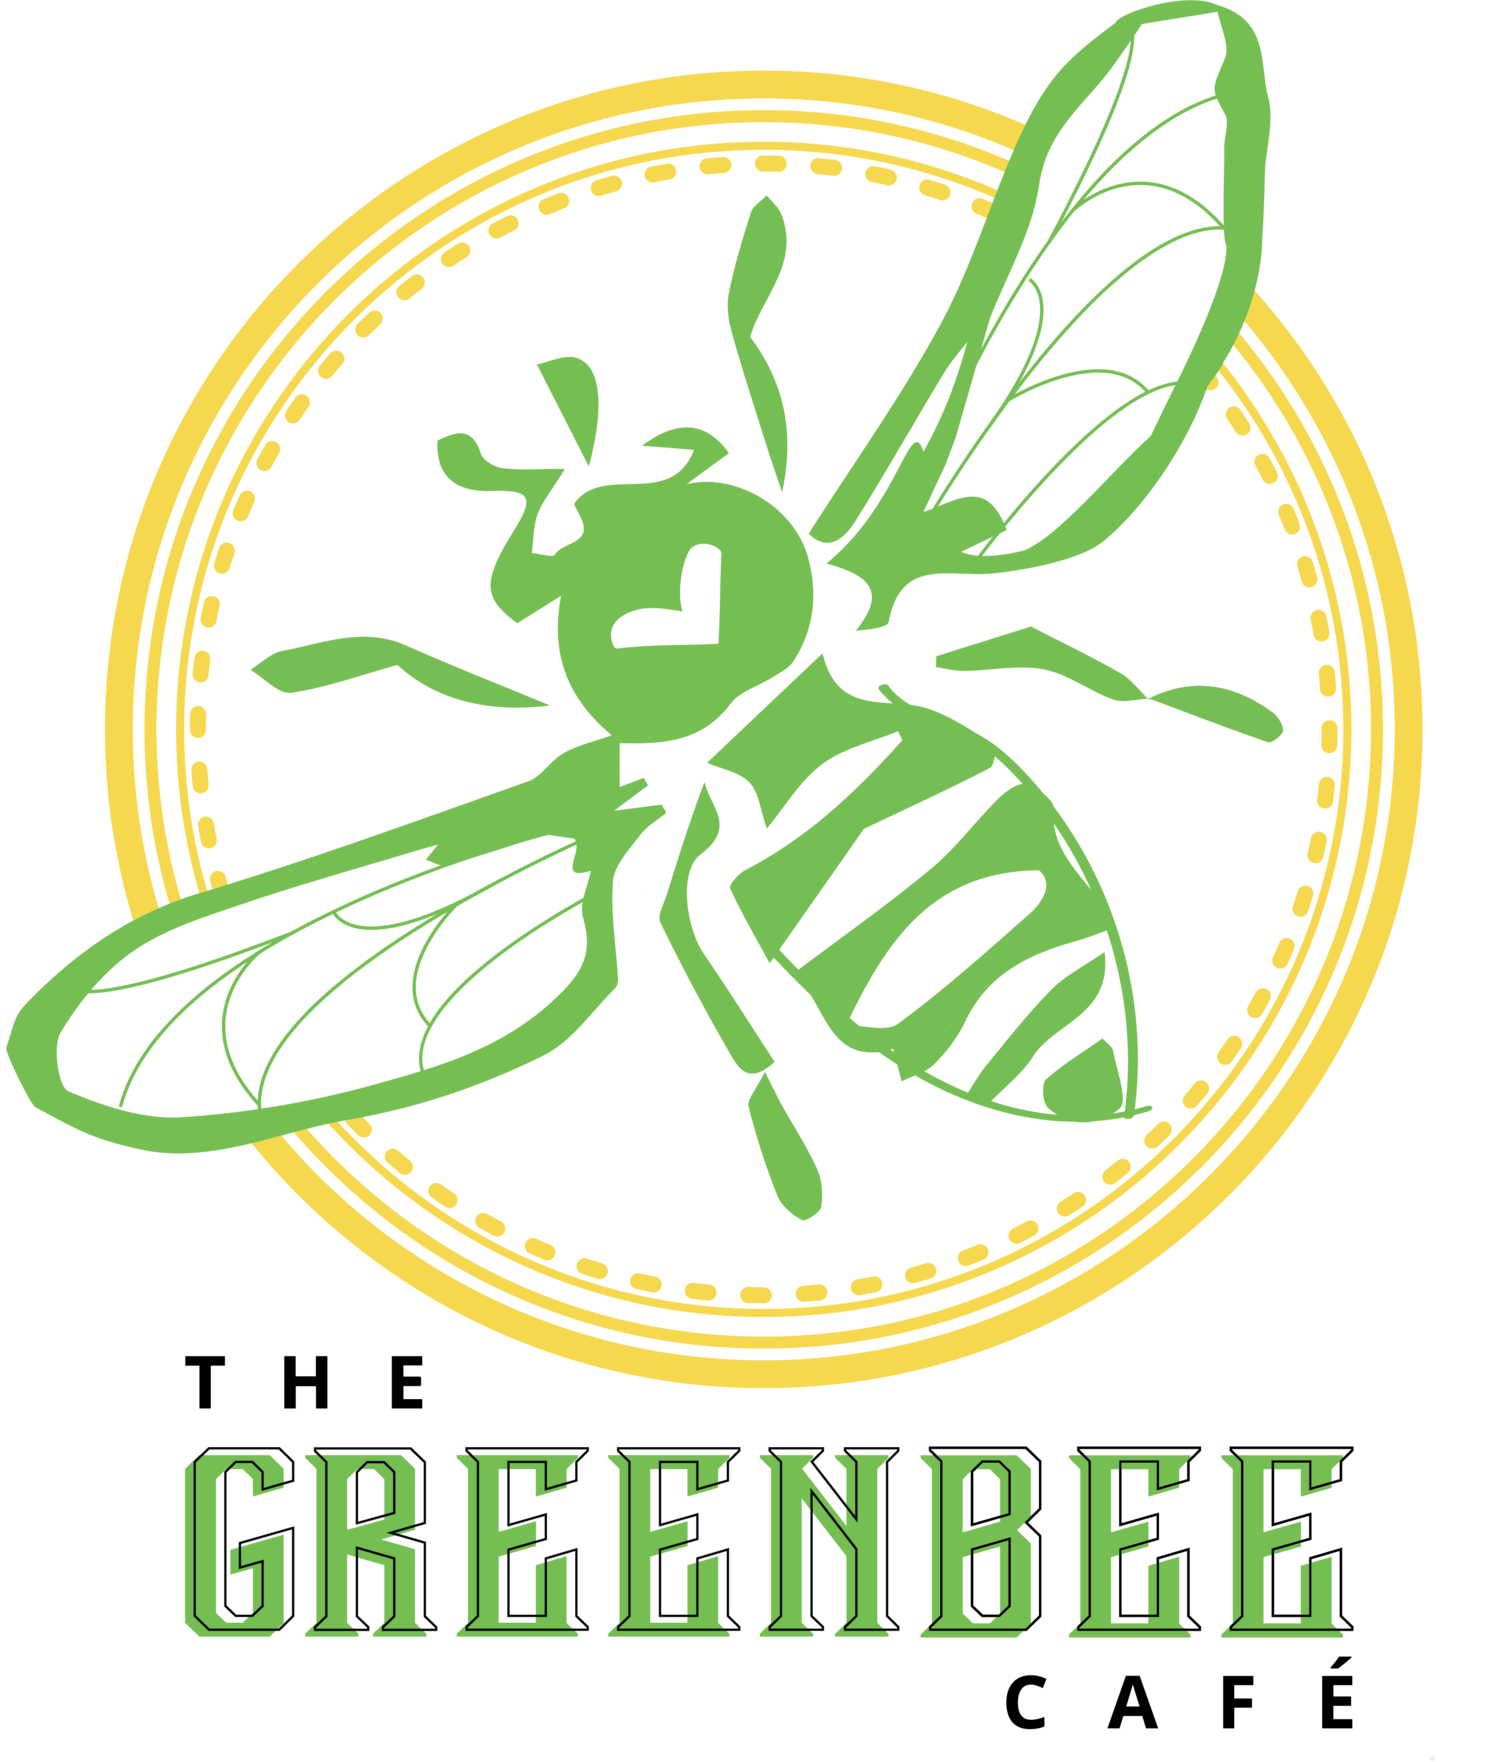 The GreenBee Cafe